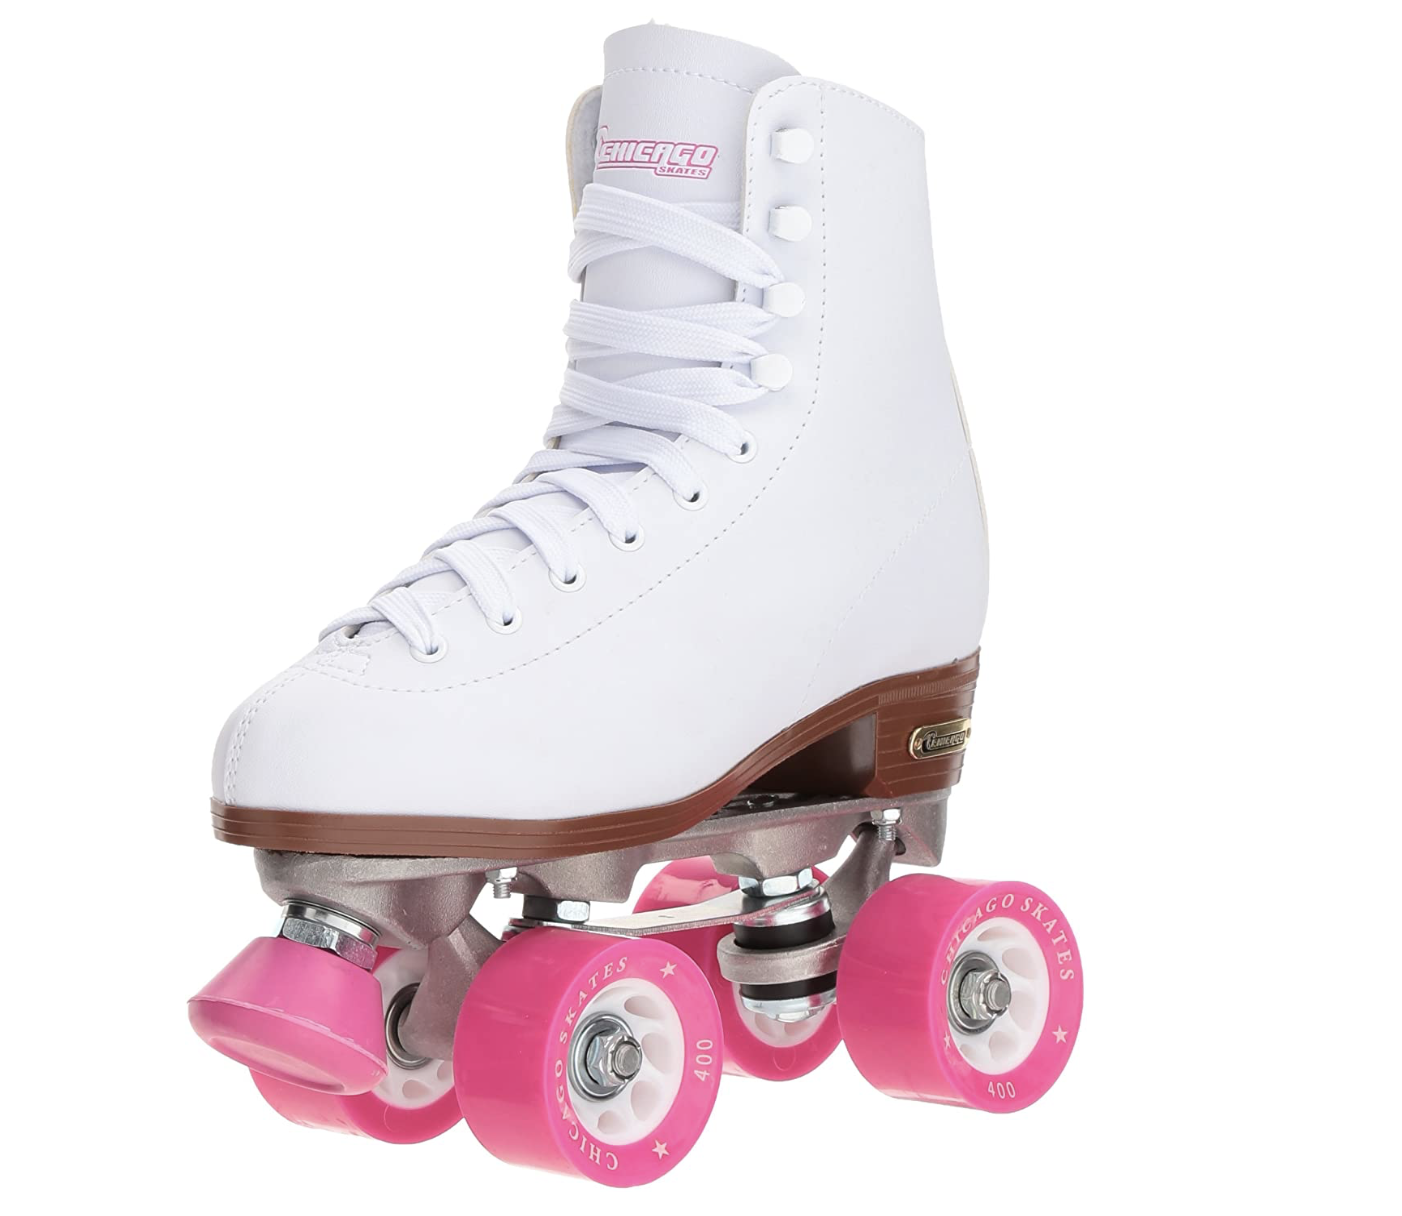 Unisex Anti-Skid Cowhide Retro Roller Skates for Man and Woman Premium Double Row Rink Skates Indoor and Rink Skating Adult XUDREZ Classic Unisex Roller Skates for Outdoor